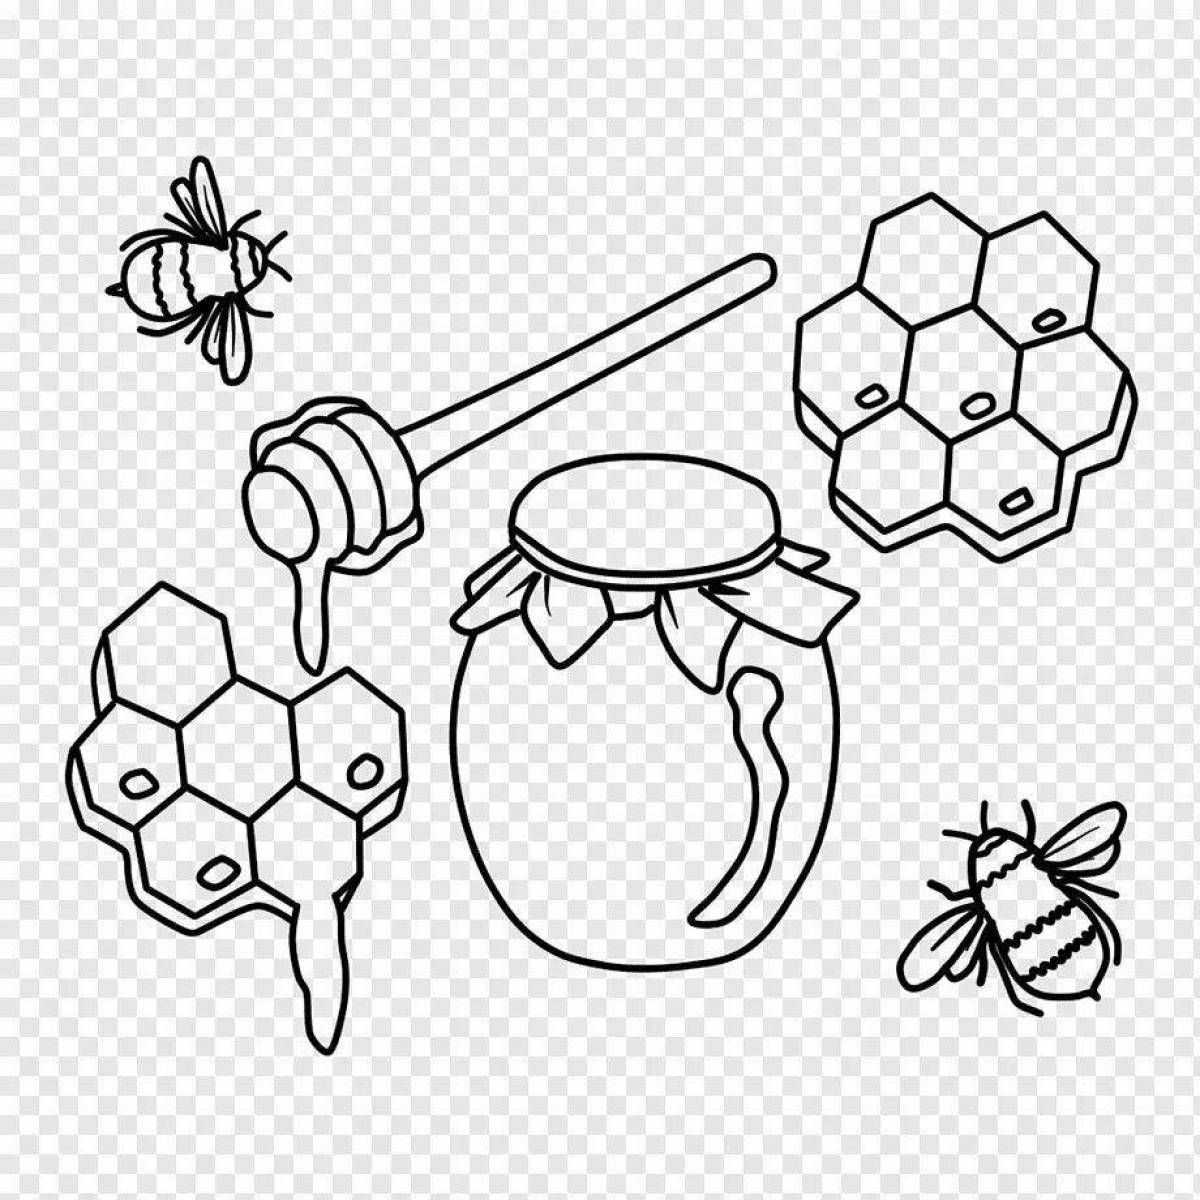 Cute honeycombs coloring pages for schoolchildren